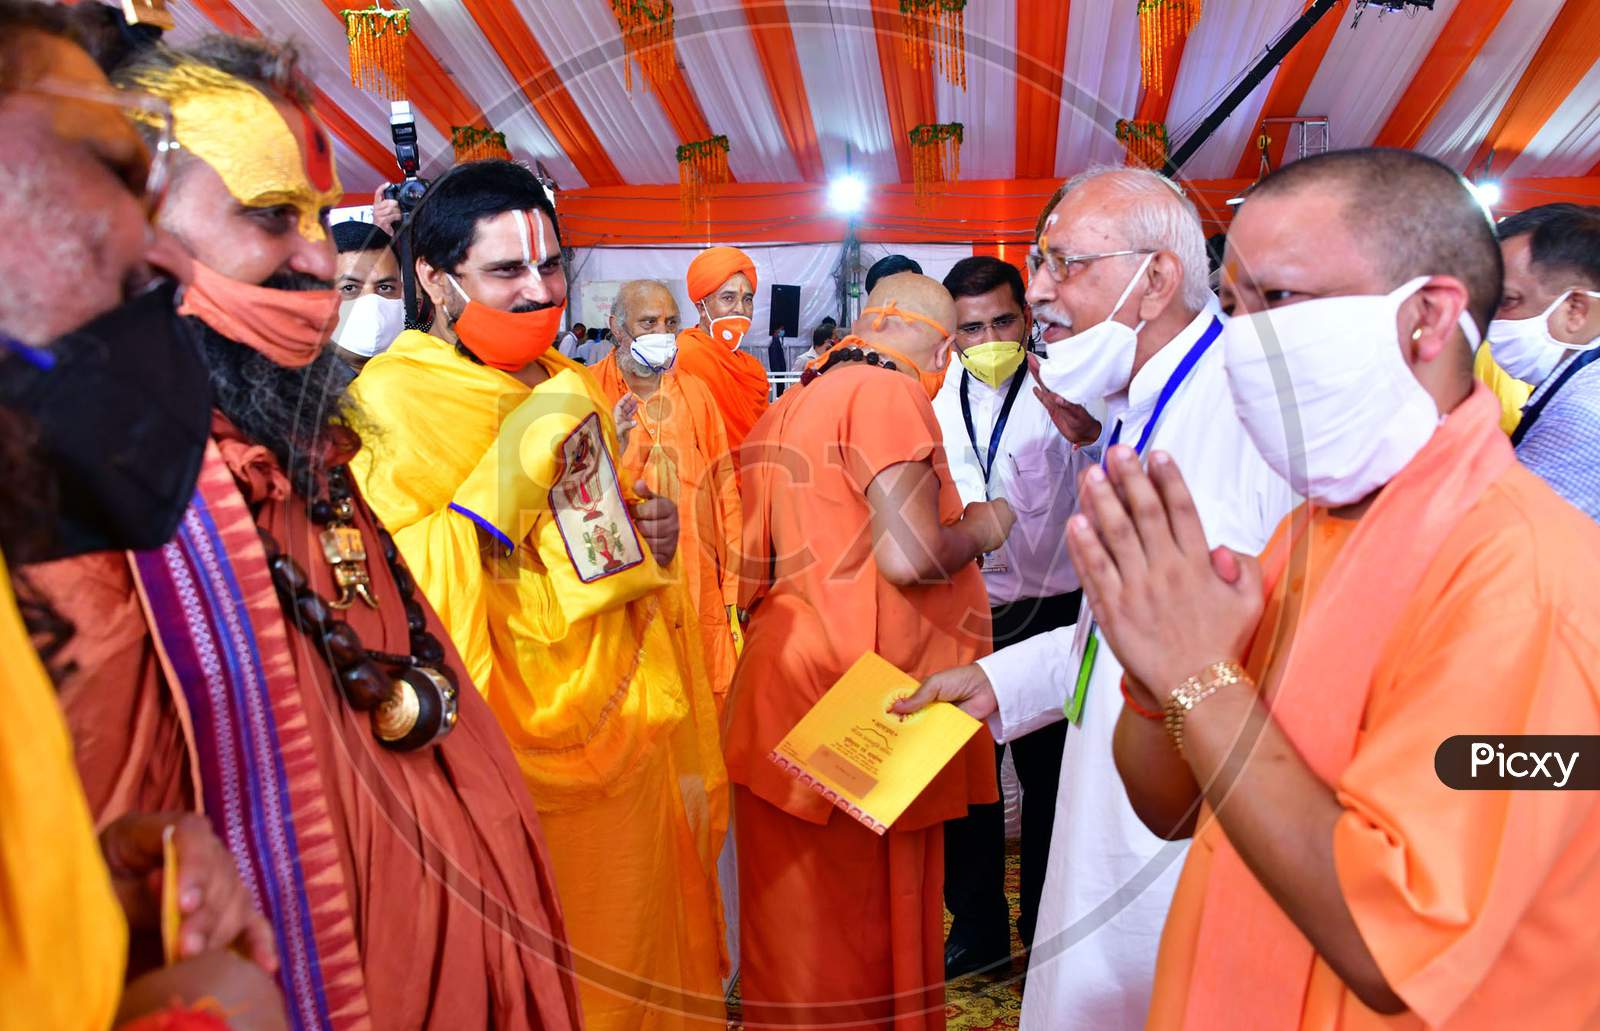 Uttar Pradesh Chief Minister Yogi Adityanath greets the local priests and Sadhus after the foundation laying ceremony for the Hindu Lord Ram's temple, in Ayodhya, India, August 5, 2020.